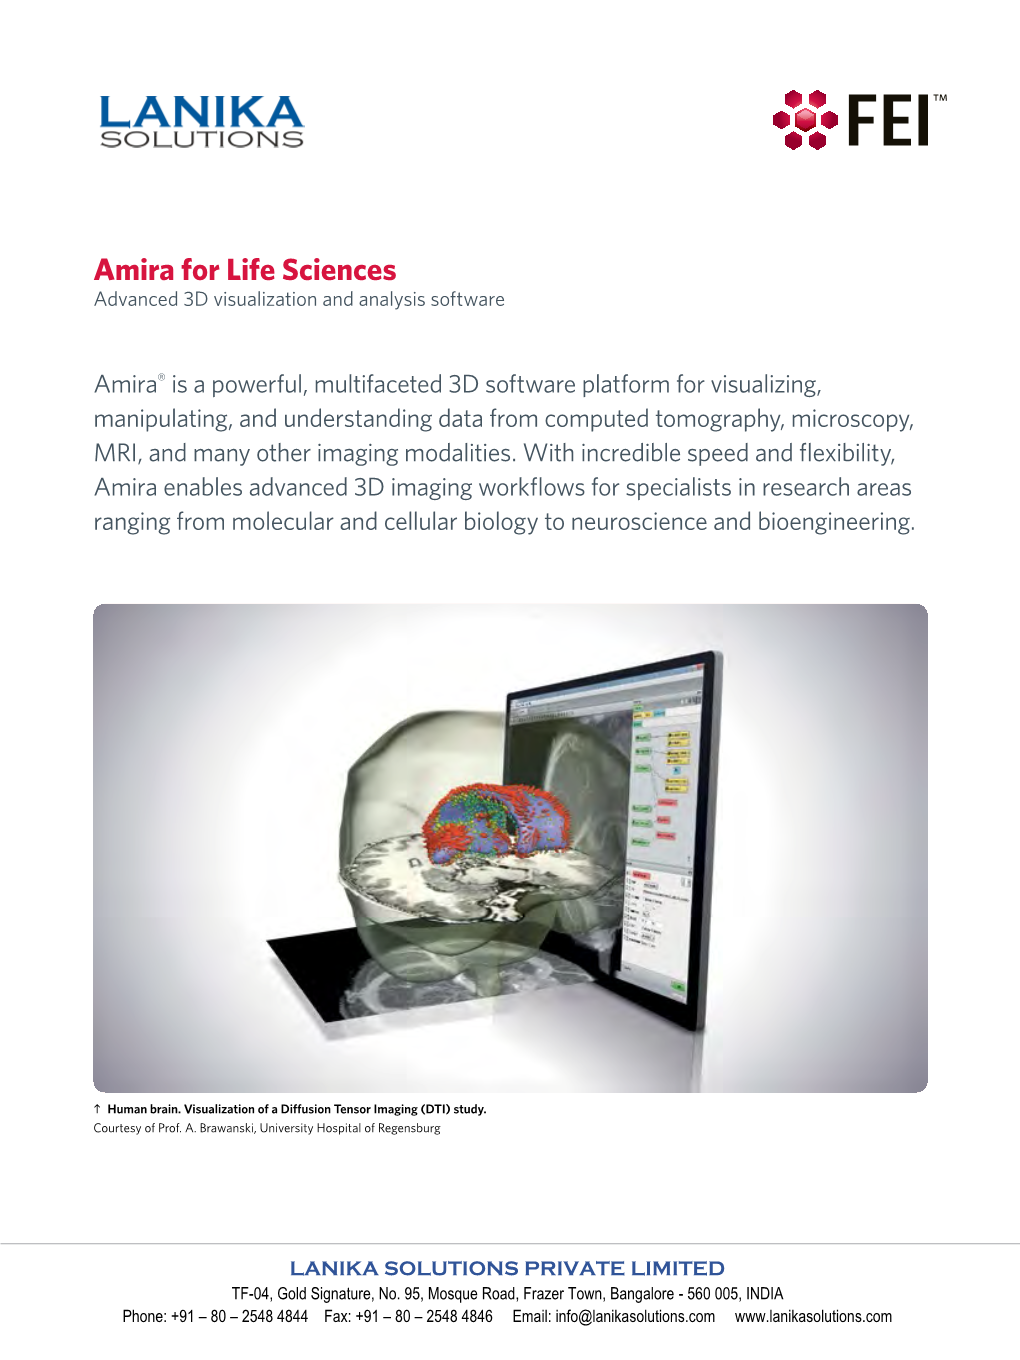 Amira for Life Sciences Advanced 3D Visualization and Analysis Software